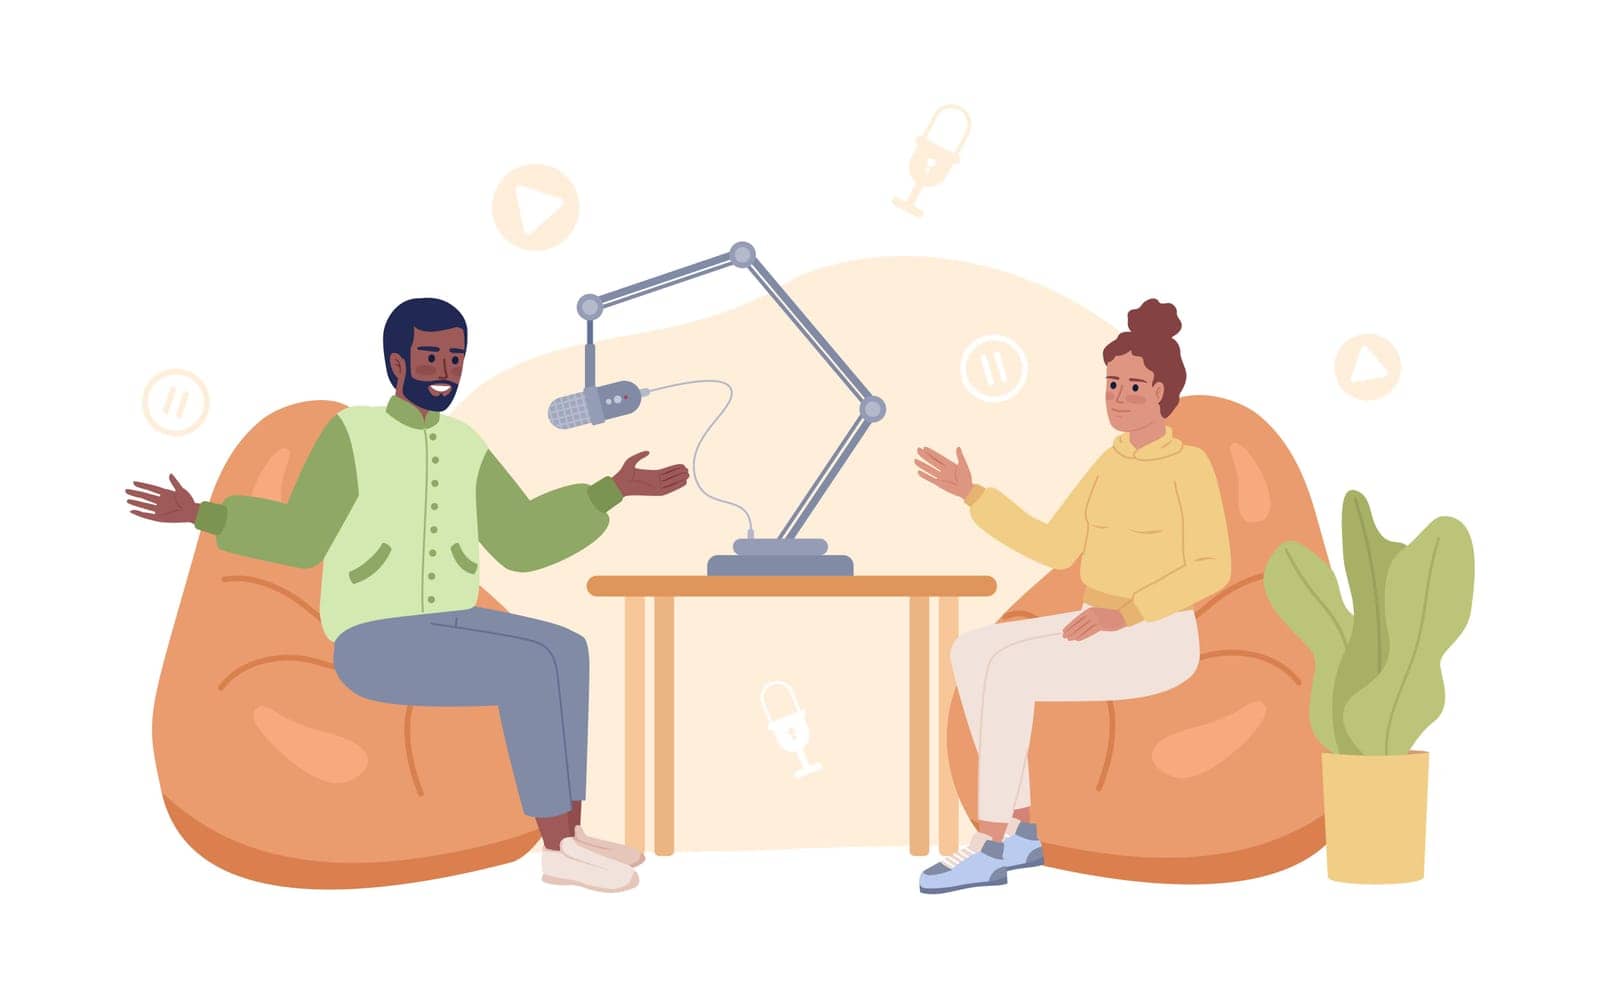 Video podcast 2D vector isolated spot illustration. Live streamers talking on bean bag chairs flat characters on cartoon background. Colorful editable scene for mobile, website, magazine